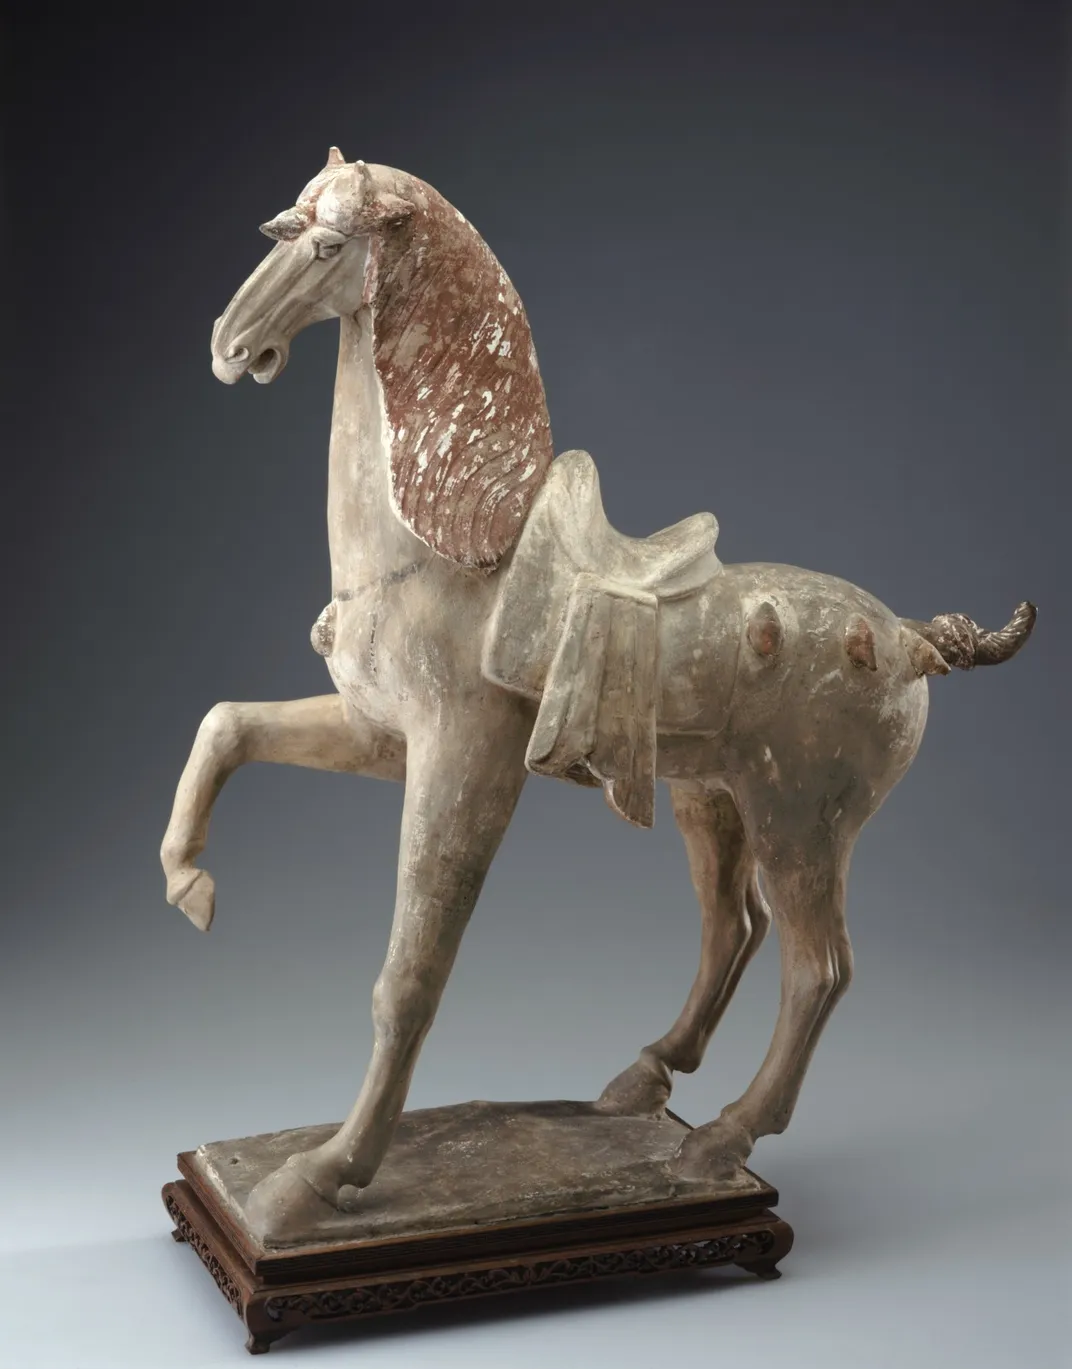 Clay sculpture of a horse, one hoof in the air and decorative tassels on the body and another on the forehead.